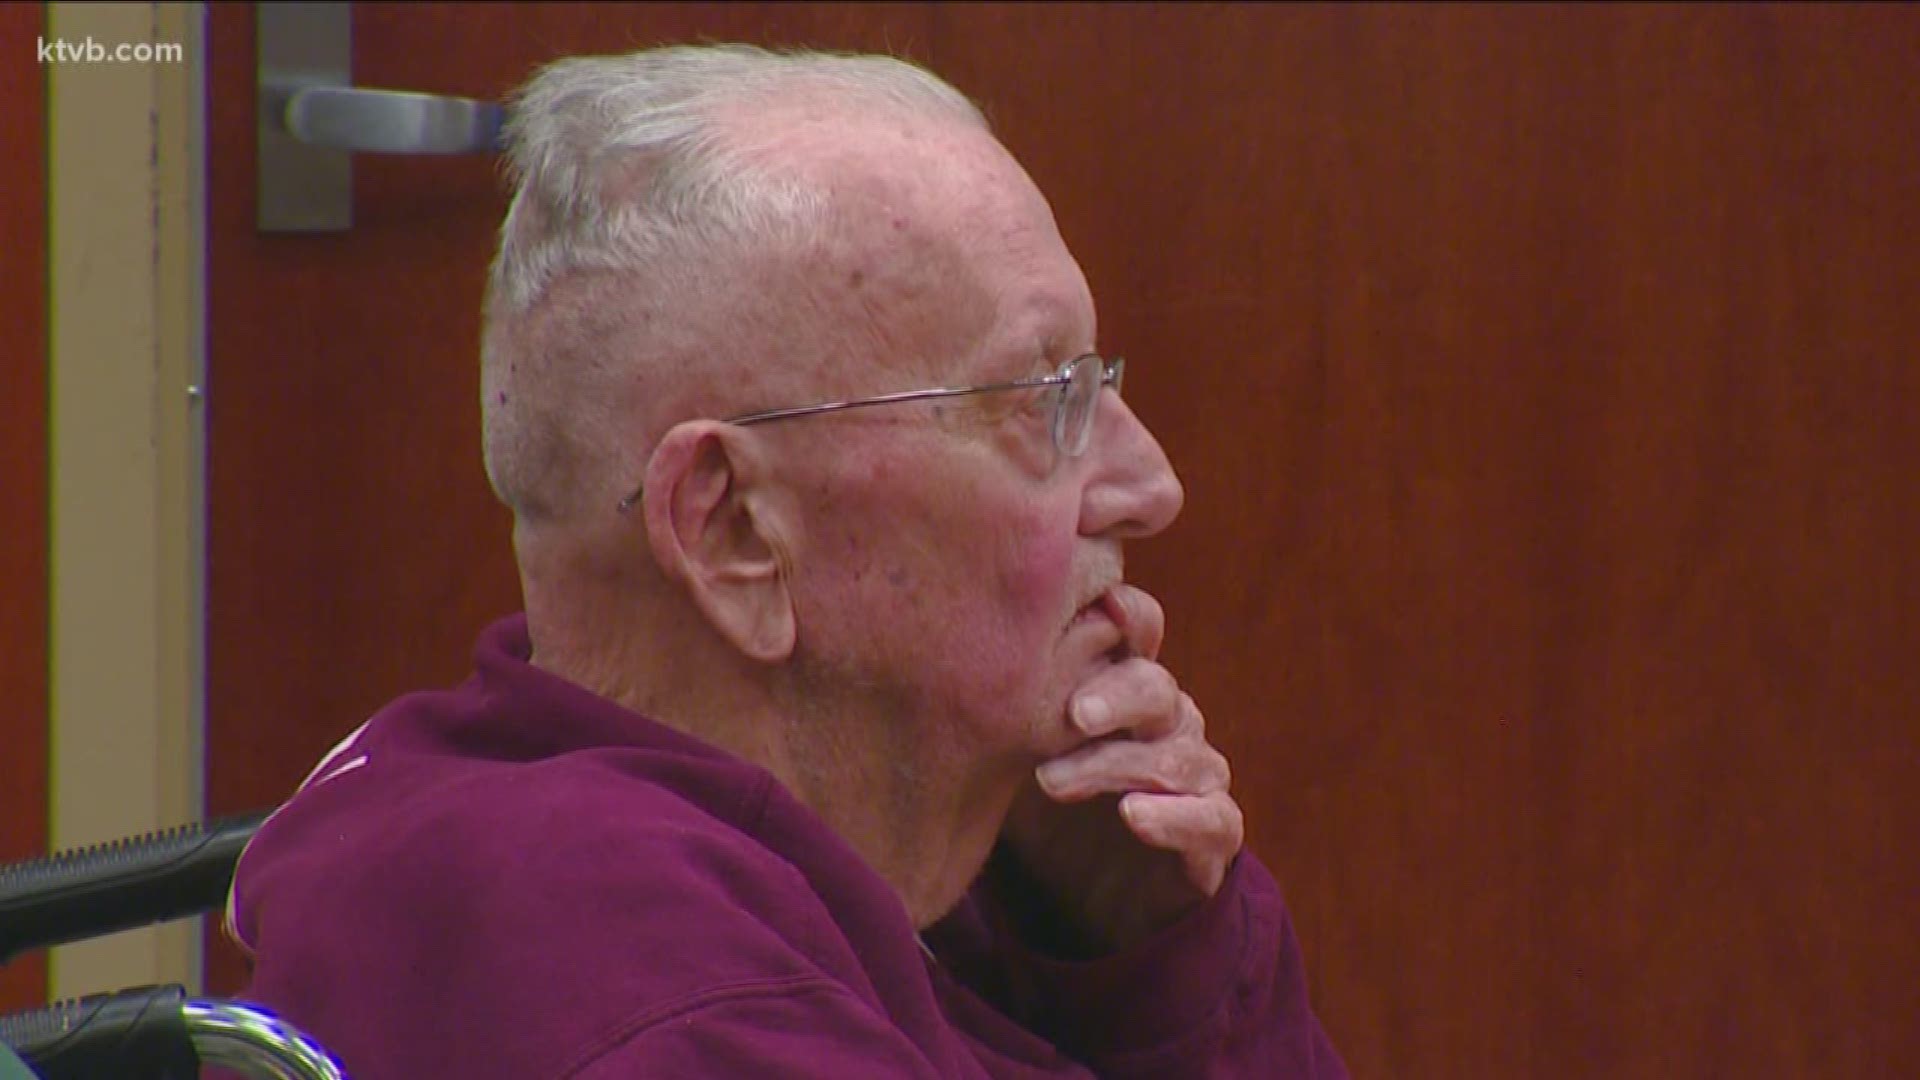 The retired Boise priest was sentenced in an Ada County courtroom Thursday.